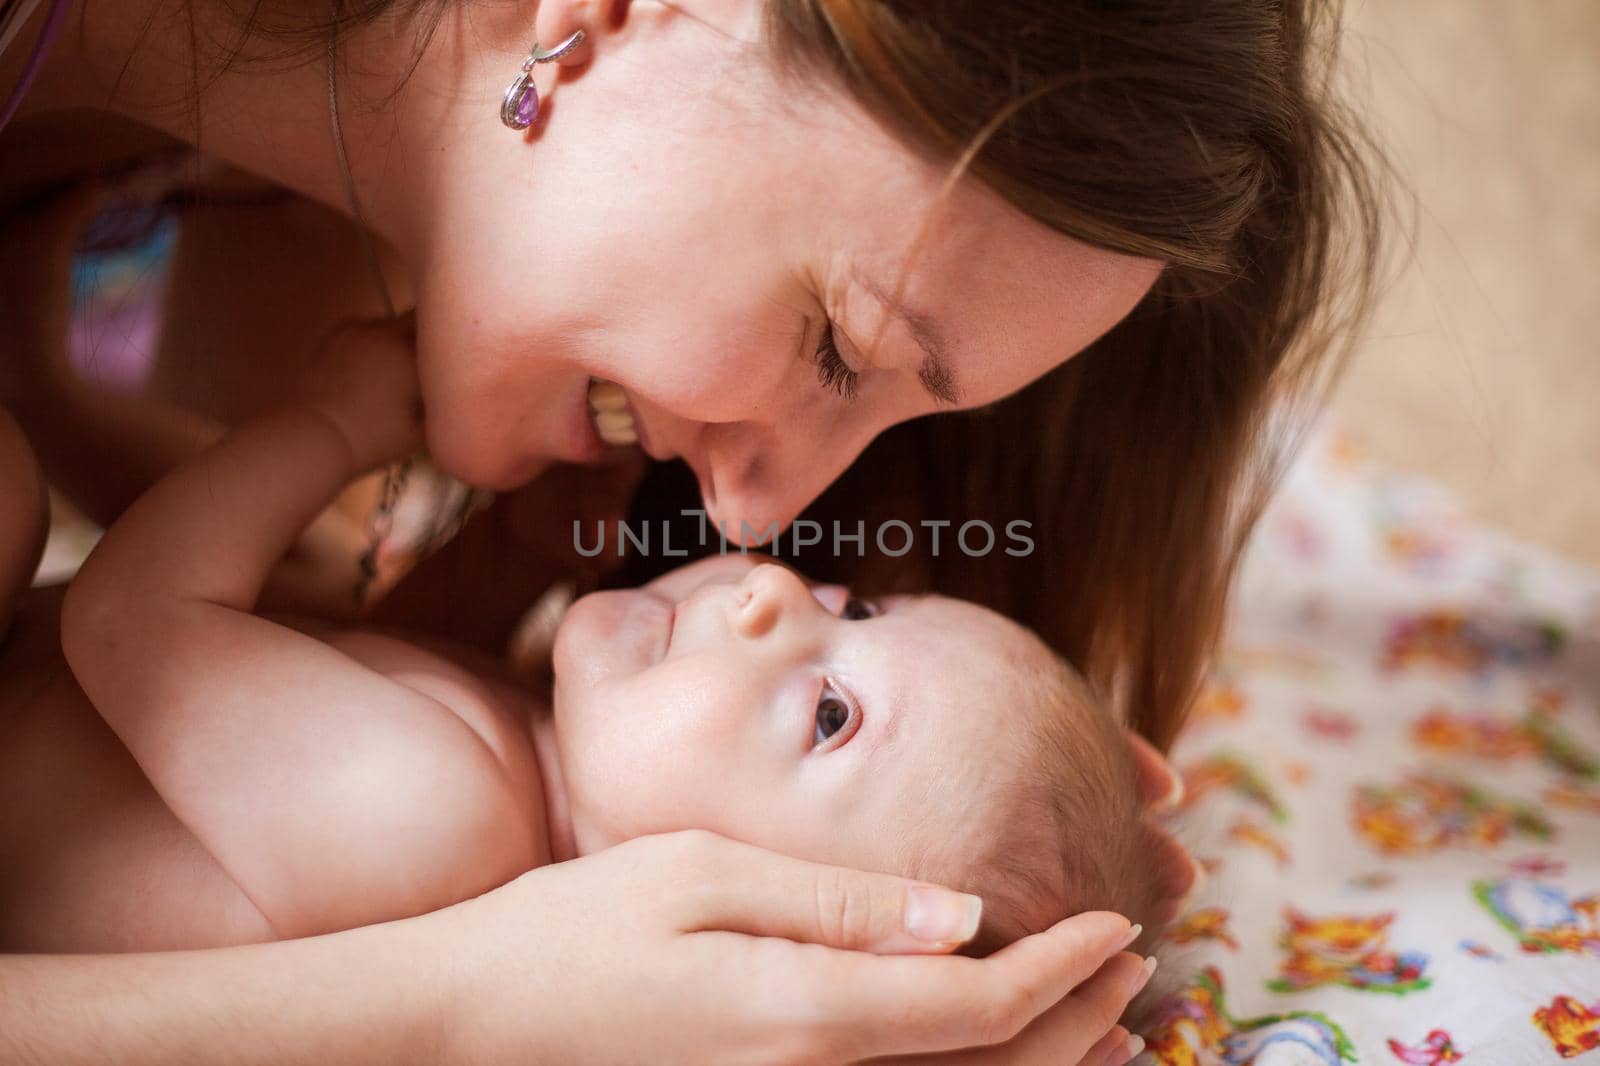 Close up portrait of beautiful young smiling mother kissing her newborn baby. Healthcare and medical love lifestyle mothers day concept